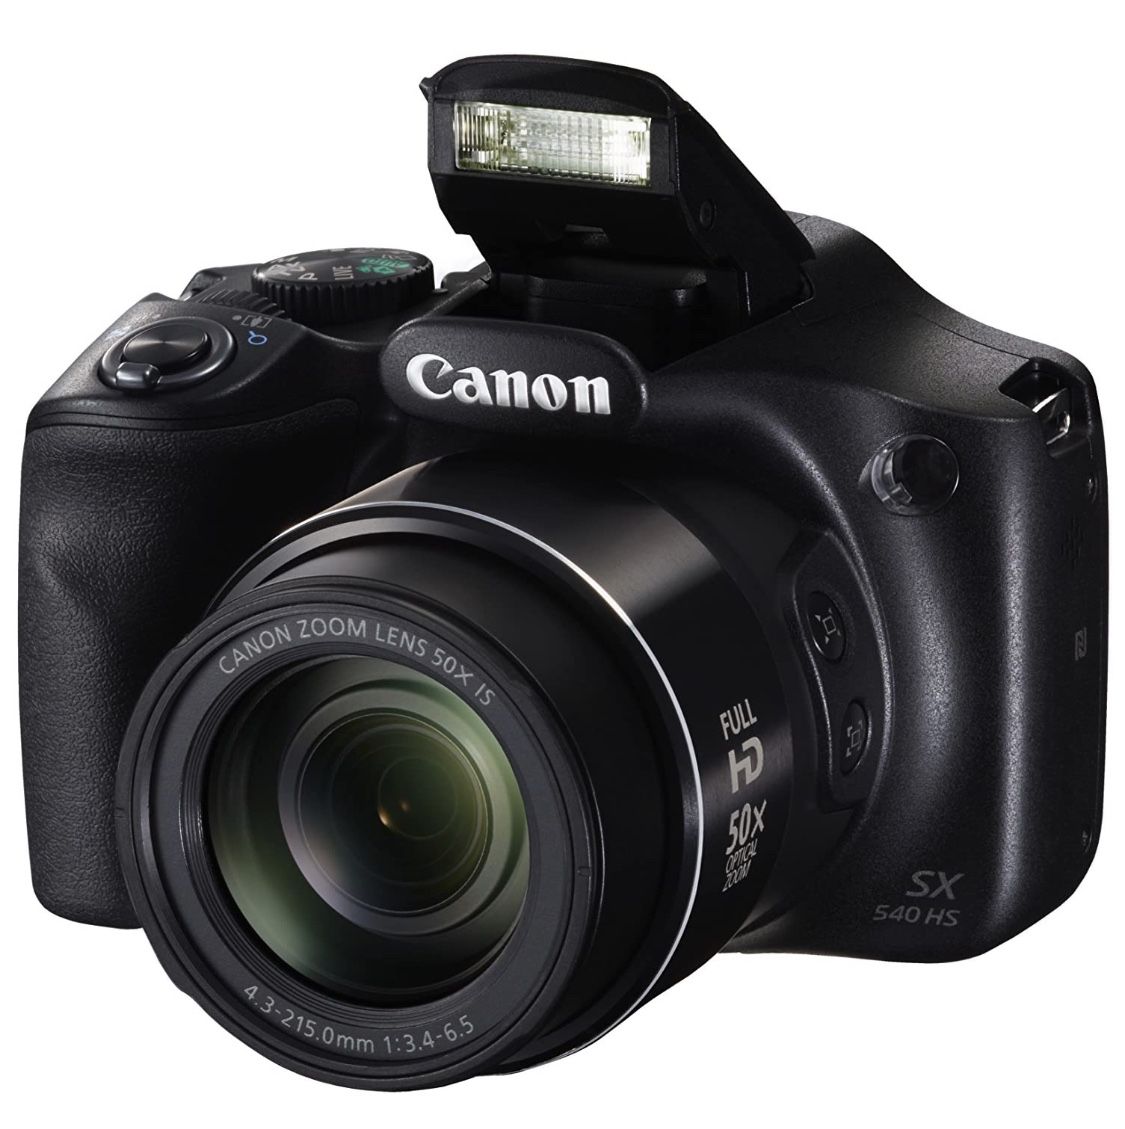 NEW Canon Power Shot SX40 HS Wi-Fi